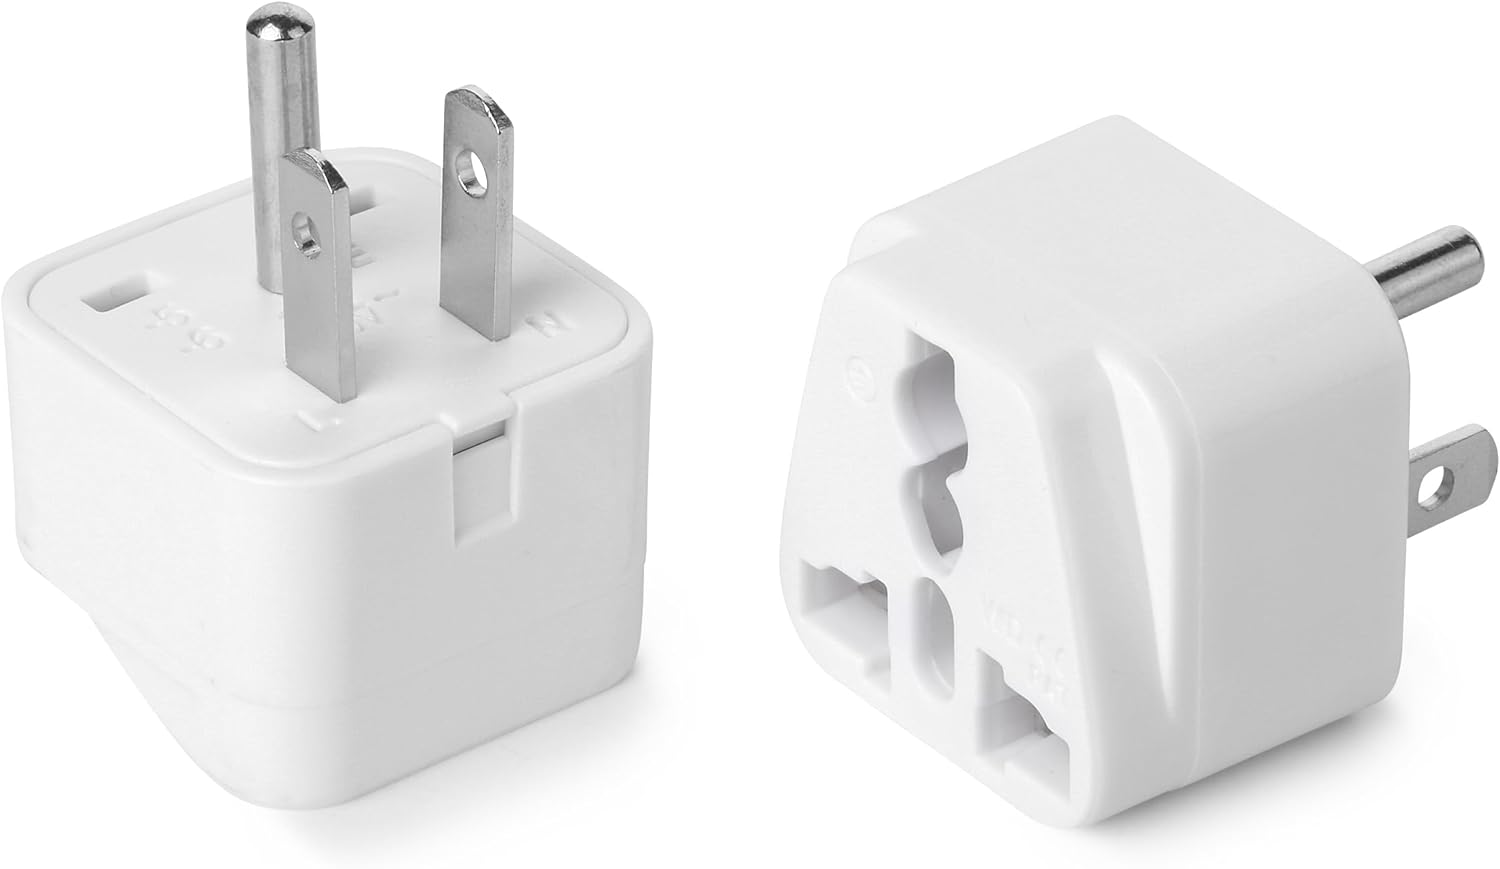 Travel Adapter Review: The Best Options for International Power Conversion